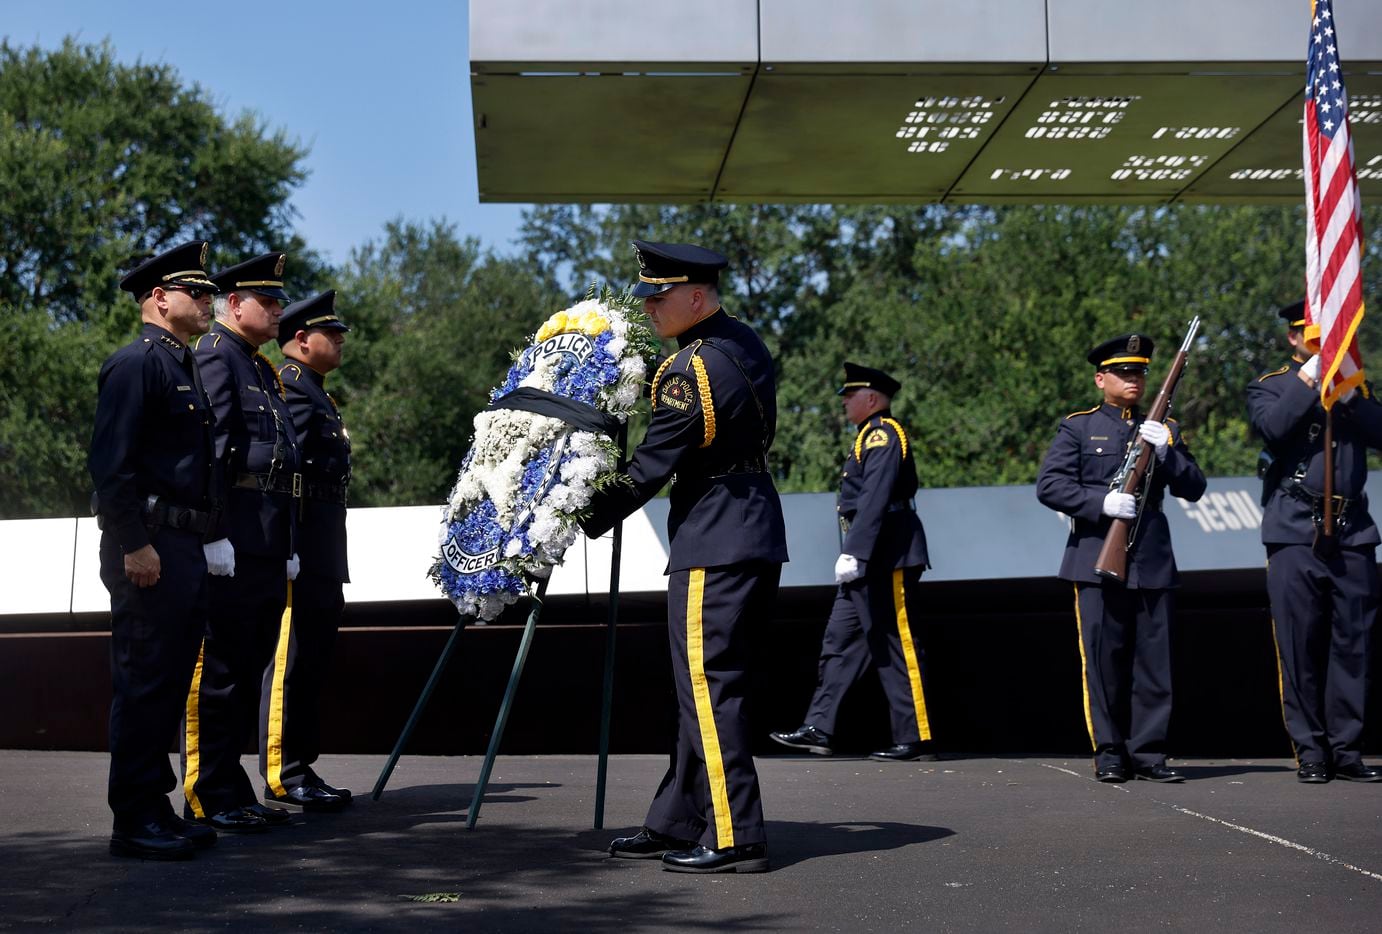 Dallas Police Chief Eddie Garcia (left) receives a wreath he placed in honor of fallen Dallas officers during the 2021 Police Memorial Day at the Dallas Police Memorial in downtown Dallas, Wednesday, July 7, 2021. (Tom Fox/The Dallas Morning News)